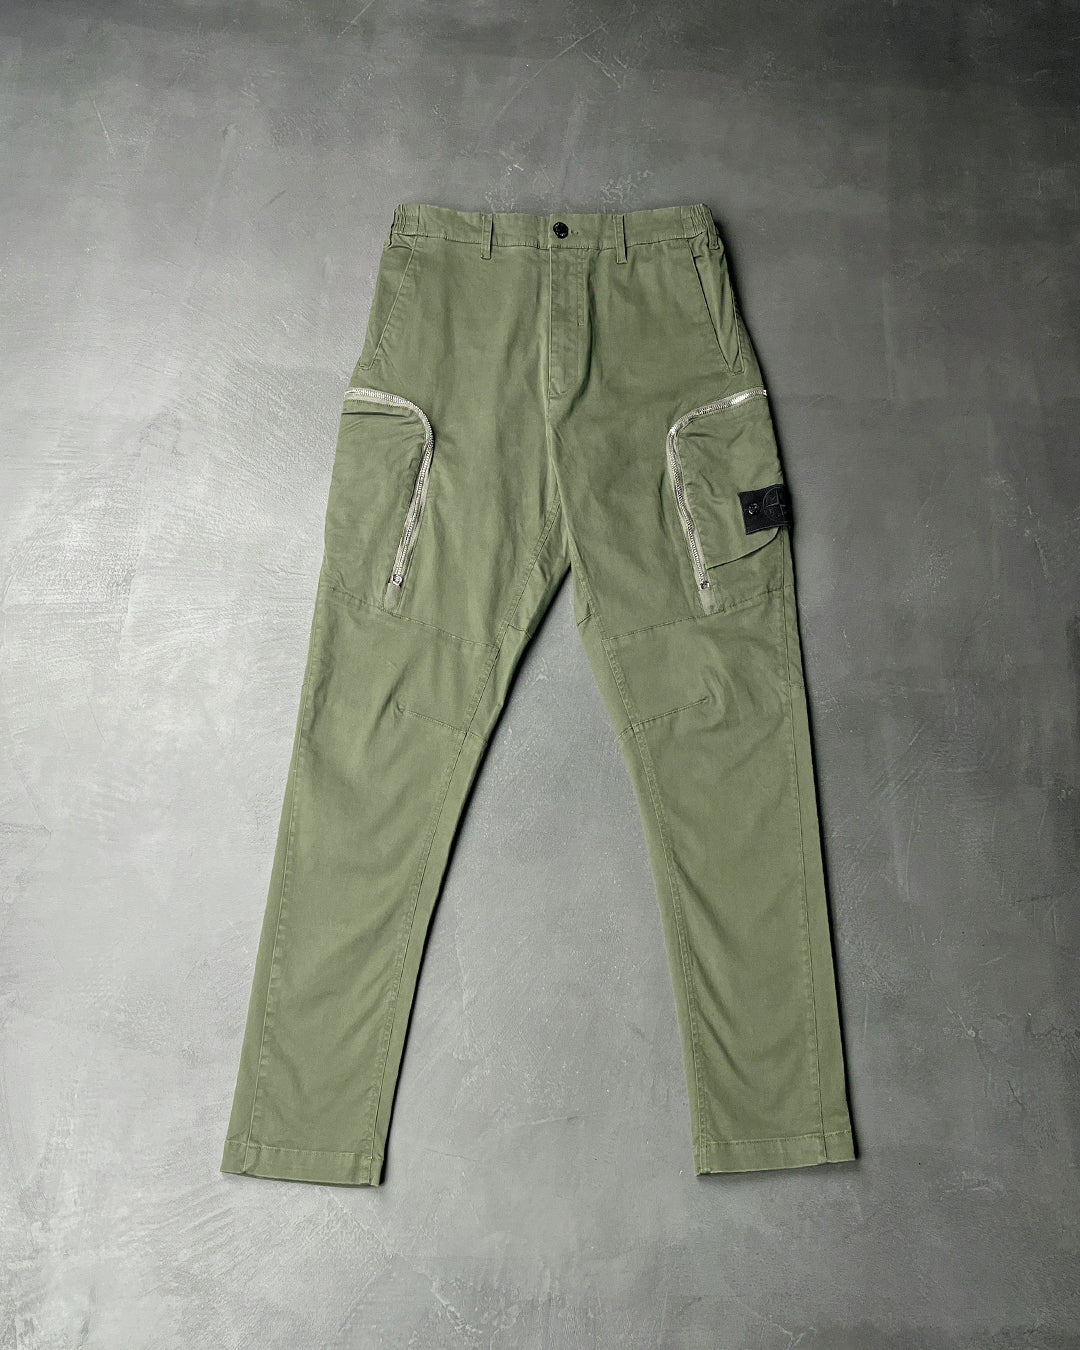 30508 Shadow Project Zip Cargo Pants Olive SI158-OL